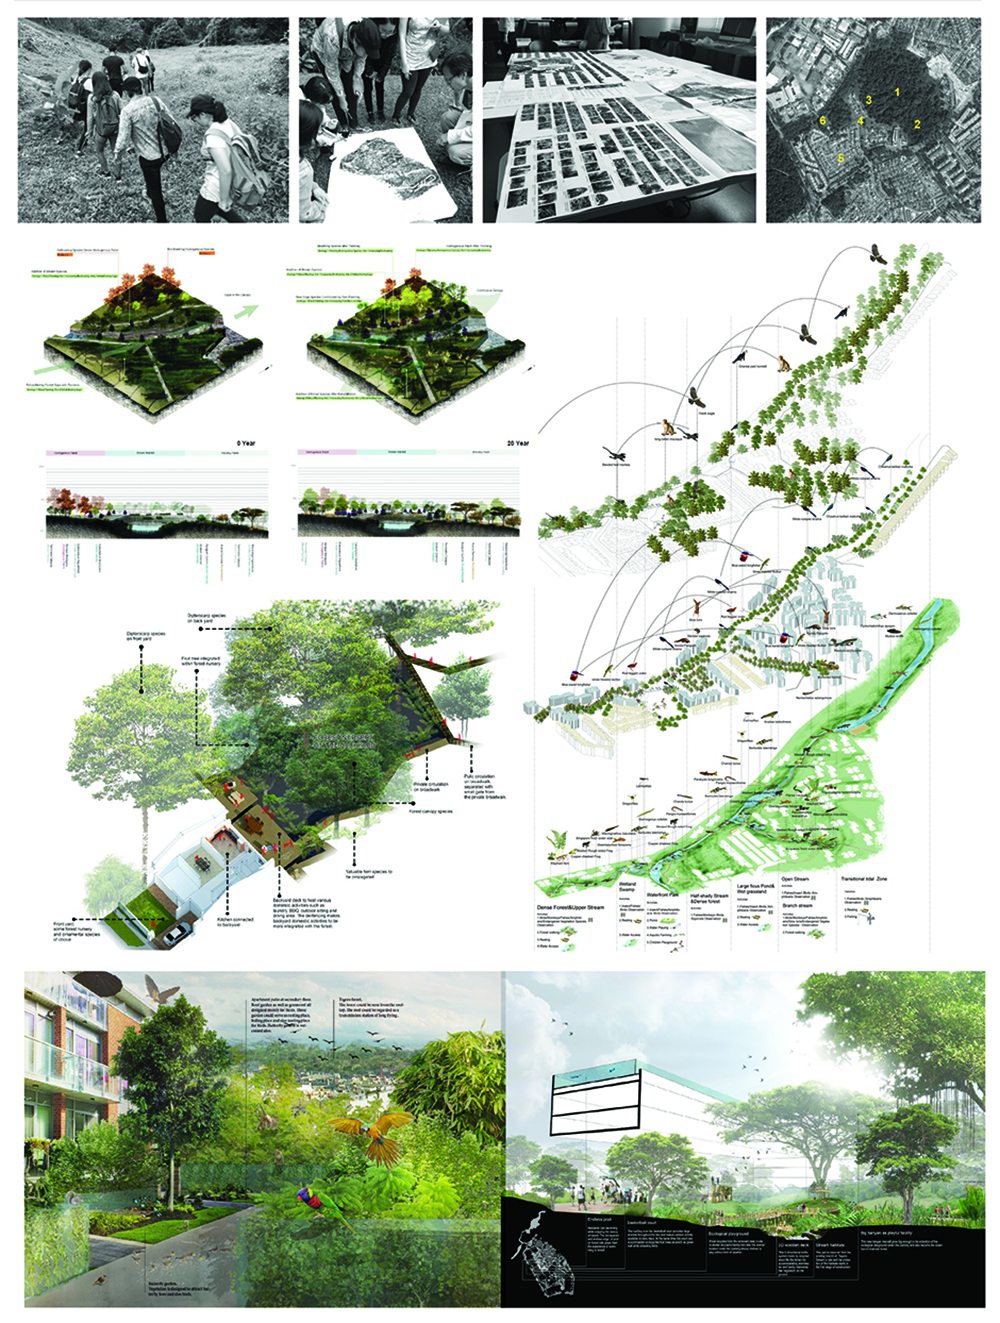 TAGORE FOREST LANDSCAPE SCENARIOS: LANDSCAPE ARCHITECTURAL APPROACHES FOR A HOUSING DEVELOPMENT IN A TROPICAL CITY